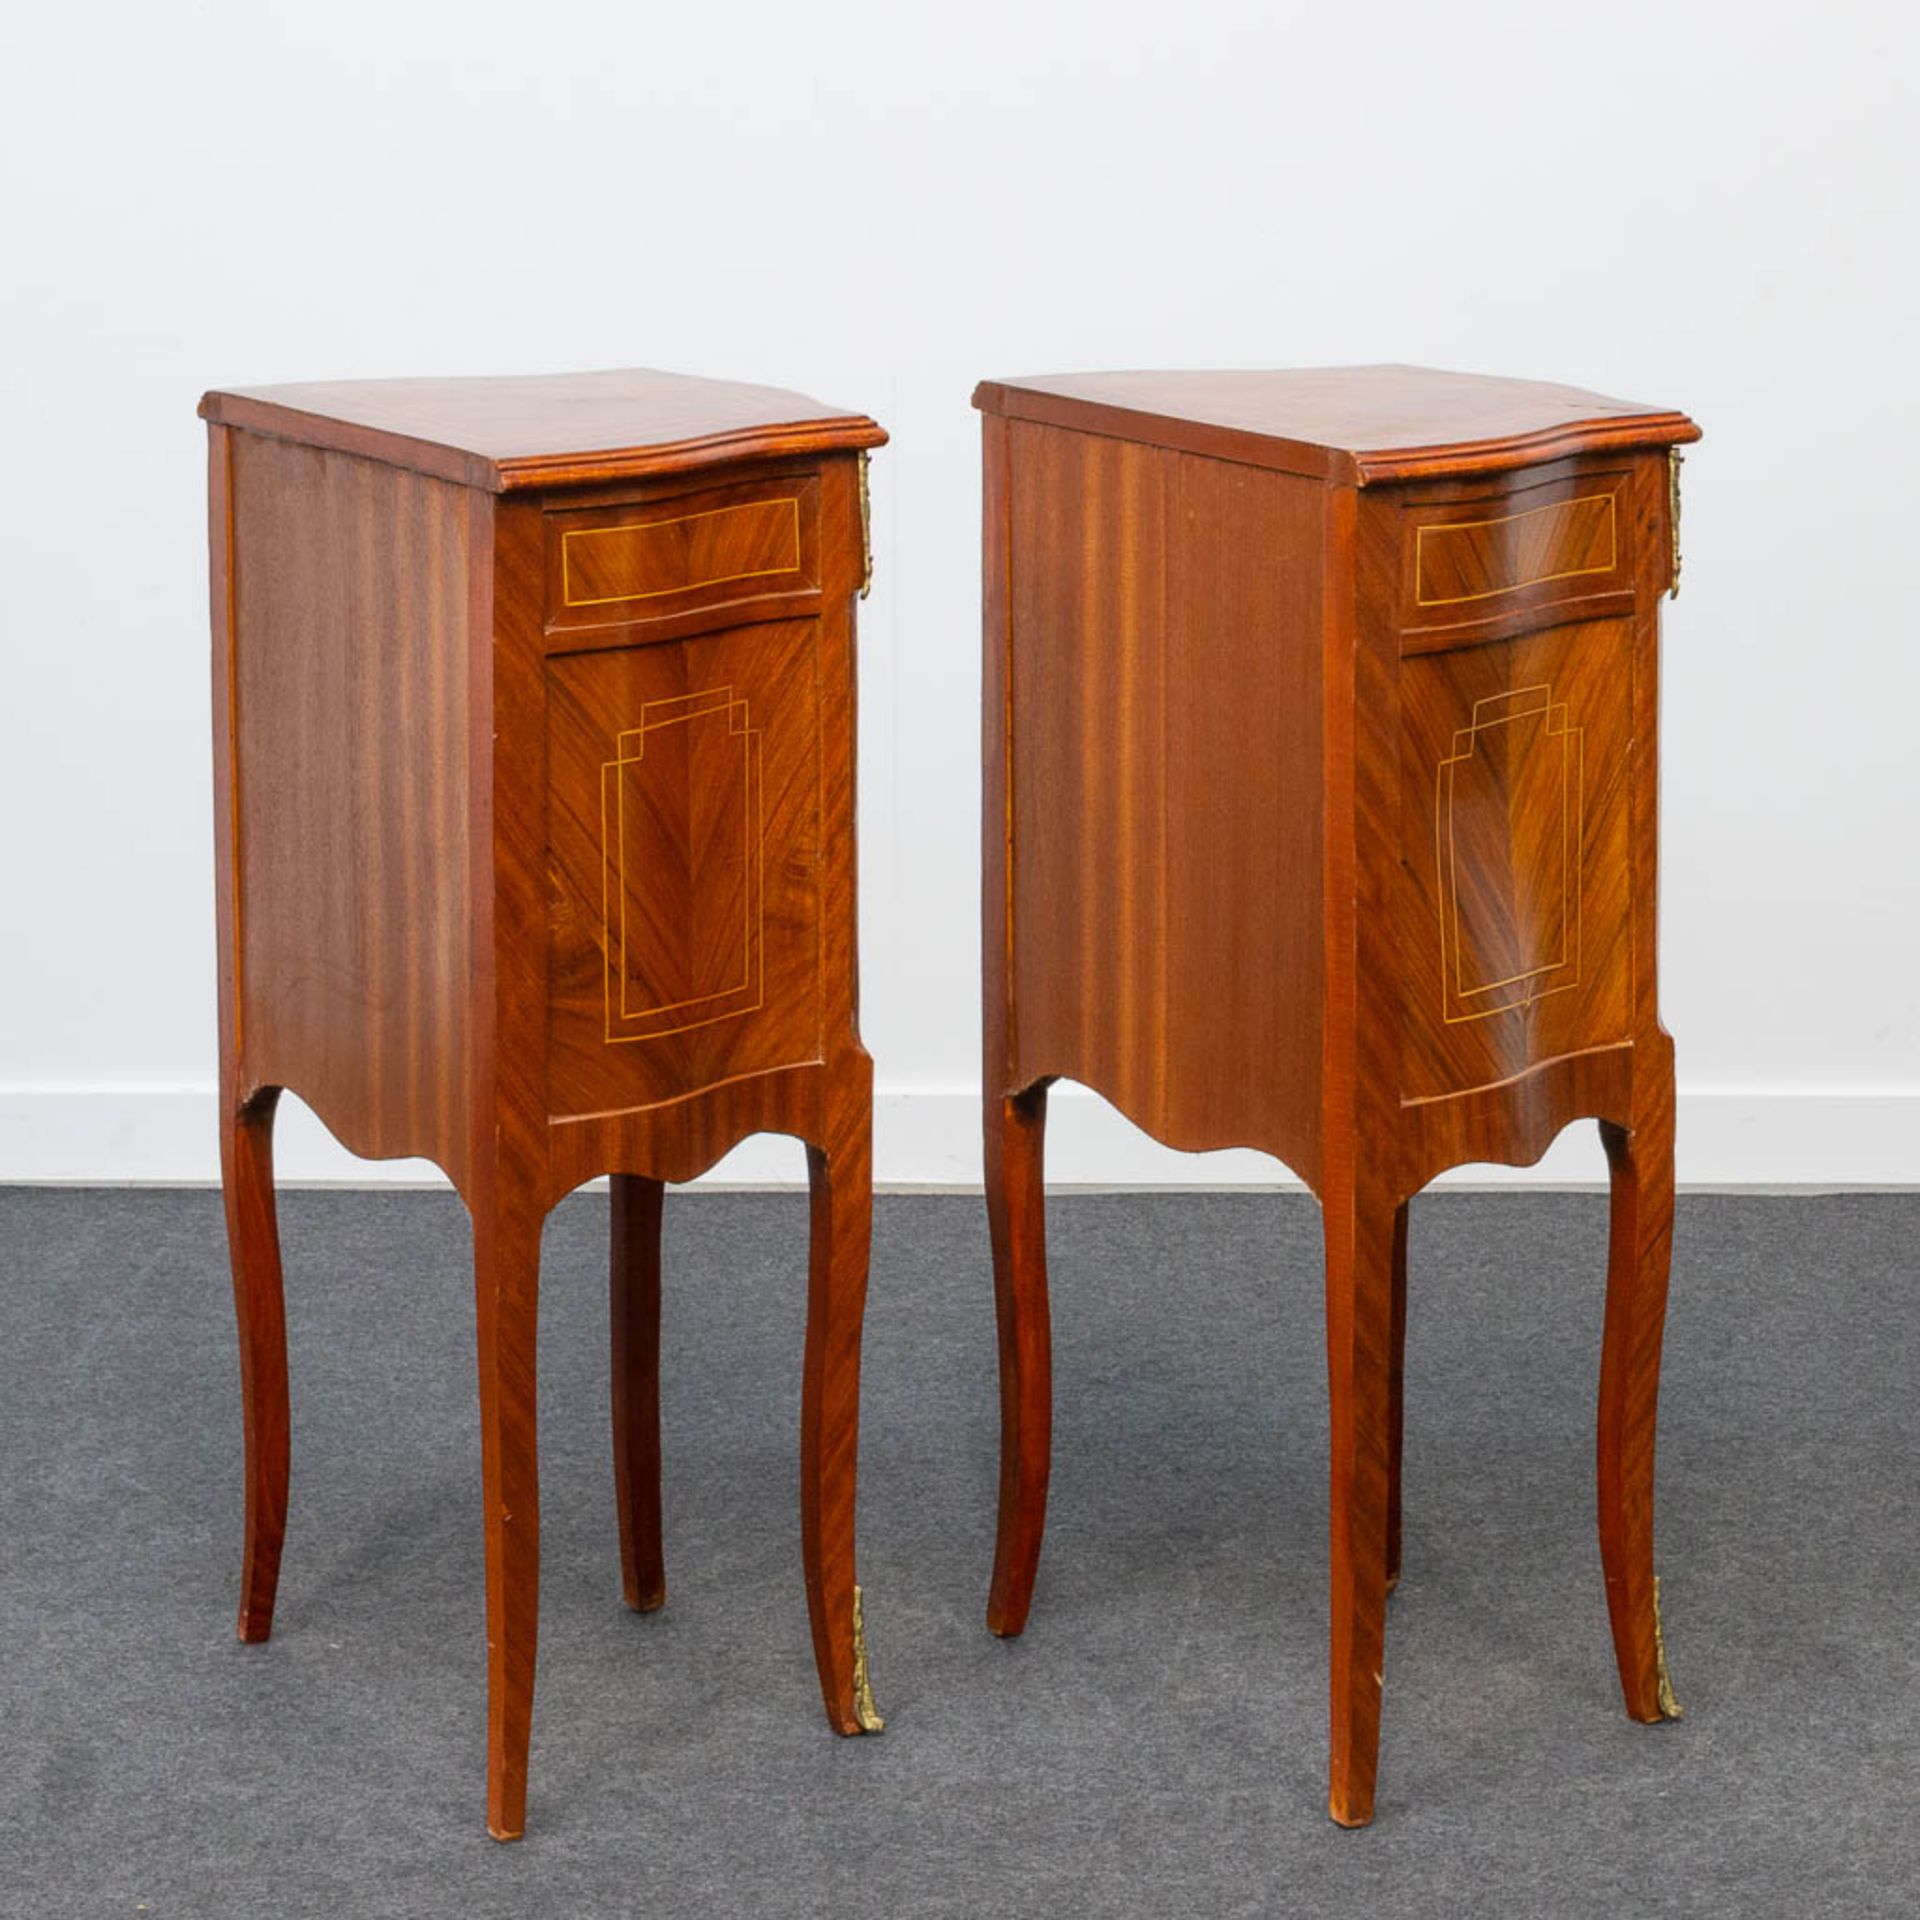 A pair of bronze mounted nightstands, inlaid with marquetry. Second half of the 20th century. - Image 10 of 22